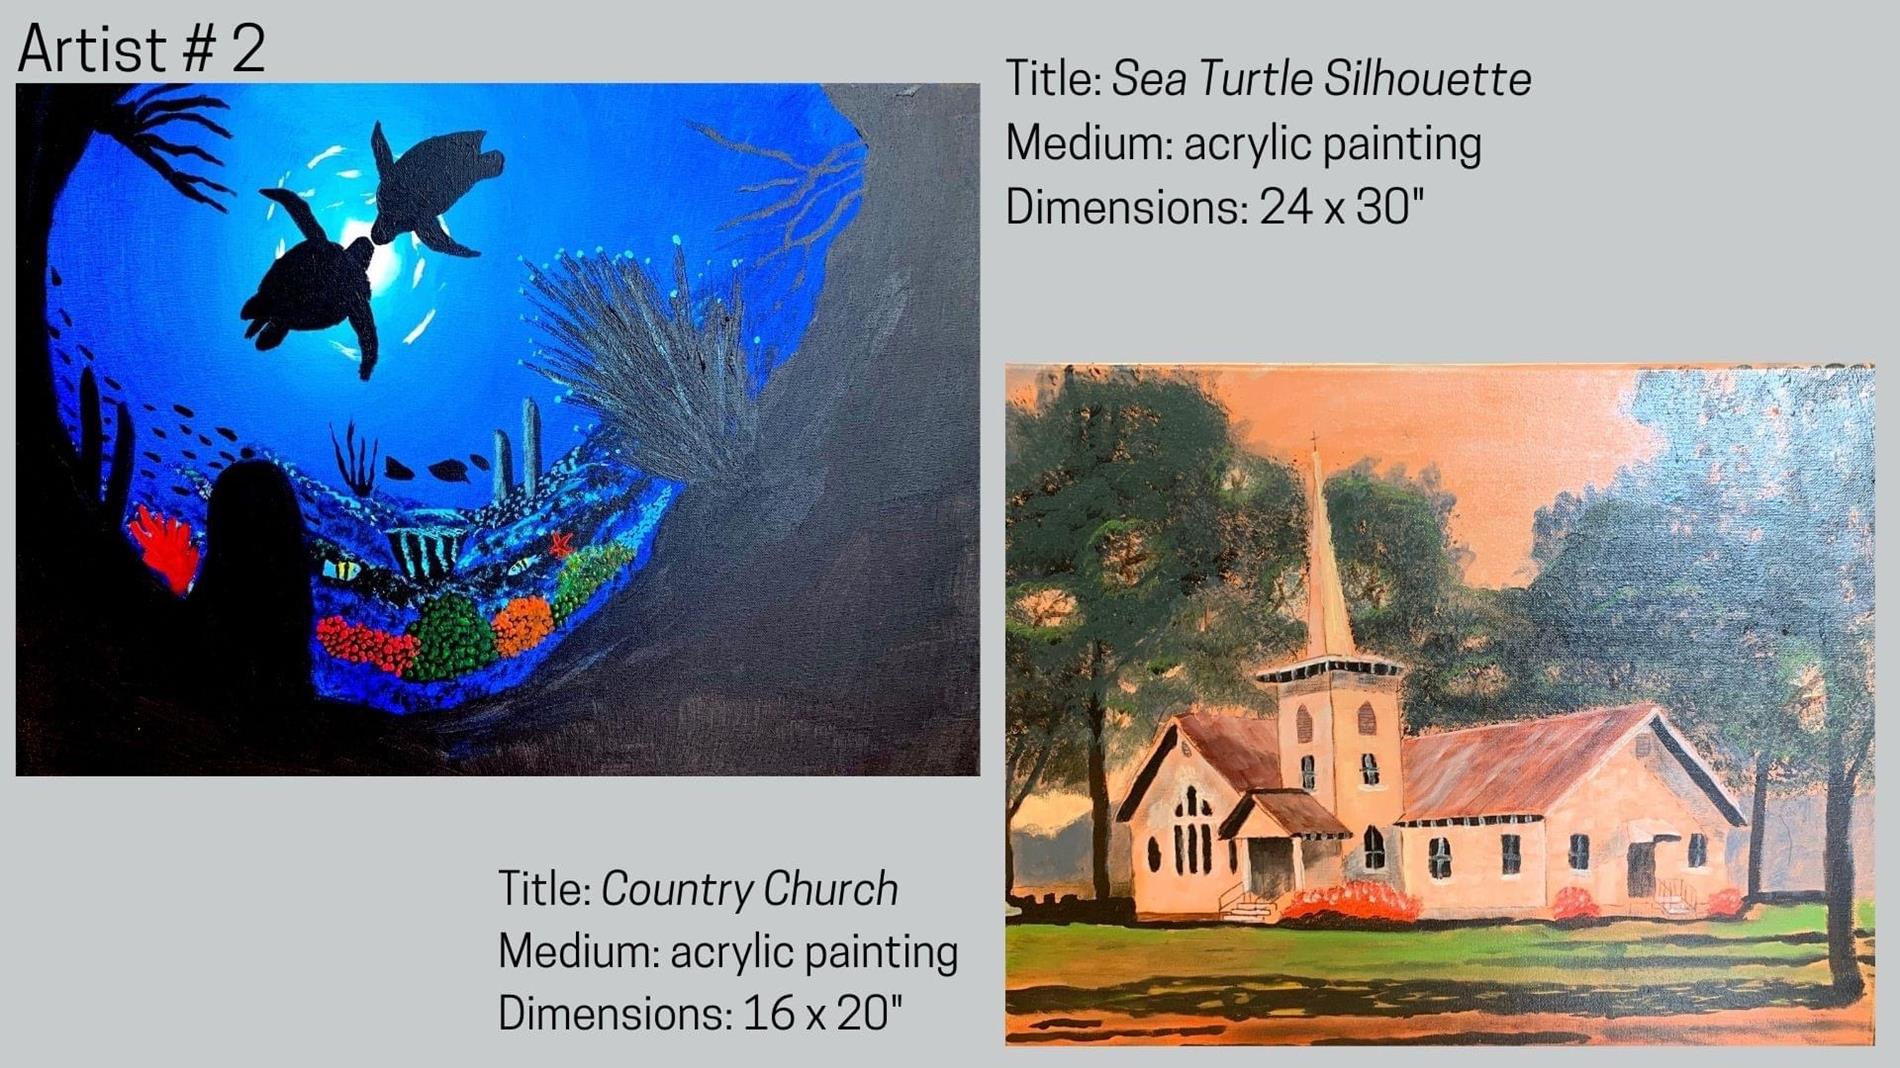 Artist #2 Title: Sea Turtle Silhouette Medium: acrylic painting Dimensions: 24 x 30" Title: Country Church Medium: acrylic painting Dimensions: 16 x 20"